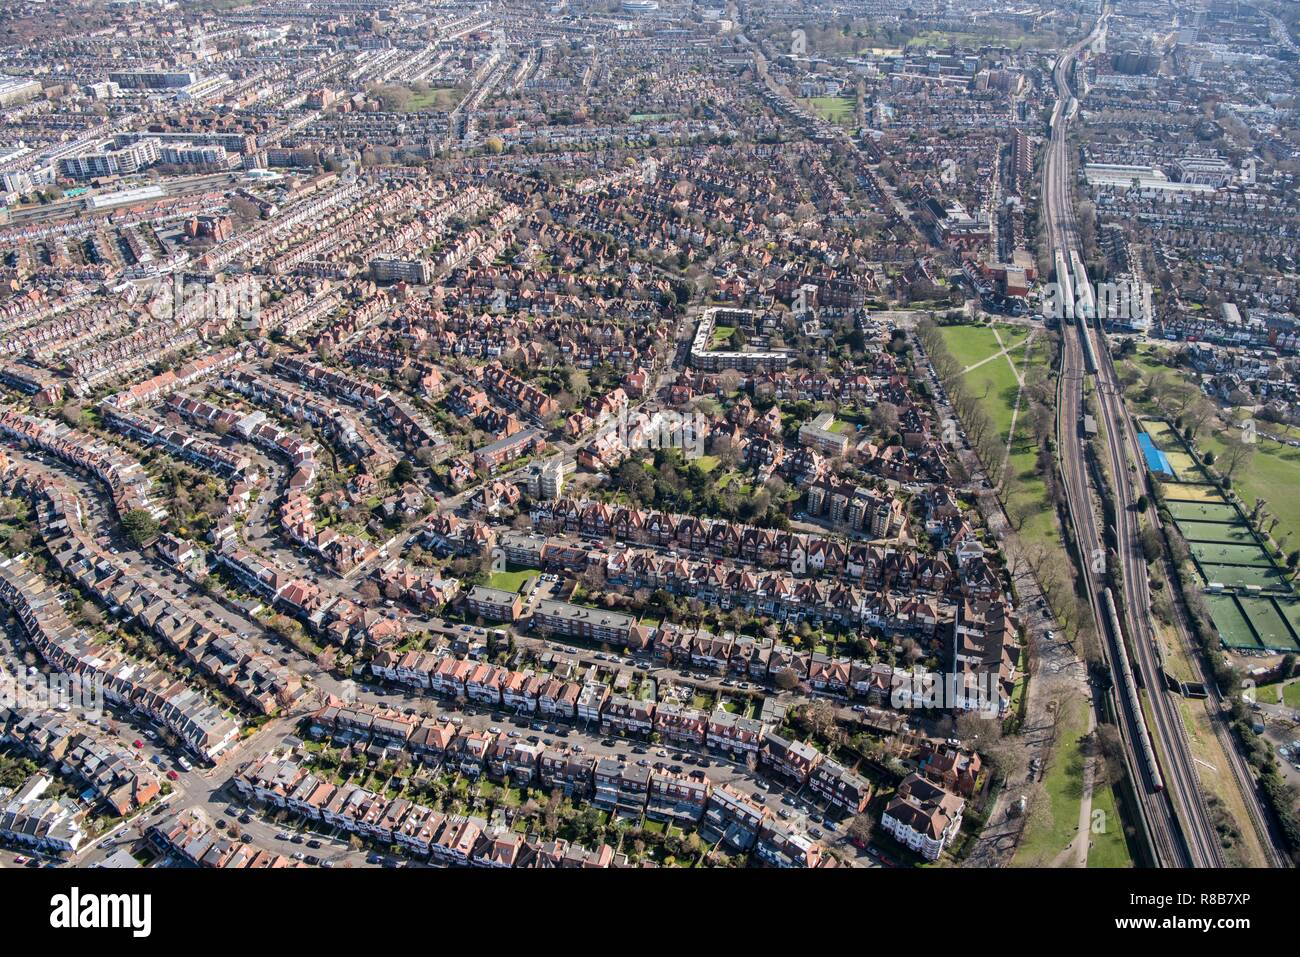 Bedford Park, considered a prototype for later garden suburbs and cities, London, 2018. Creator: Historic England Staff Photographer. Stock Photo